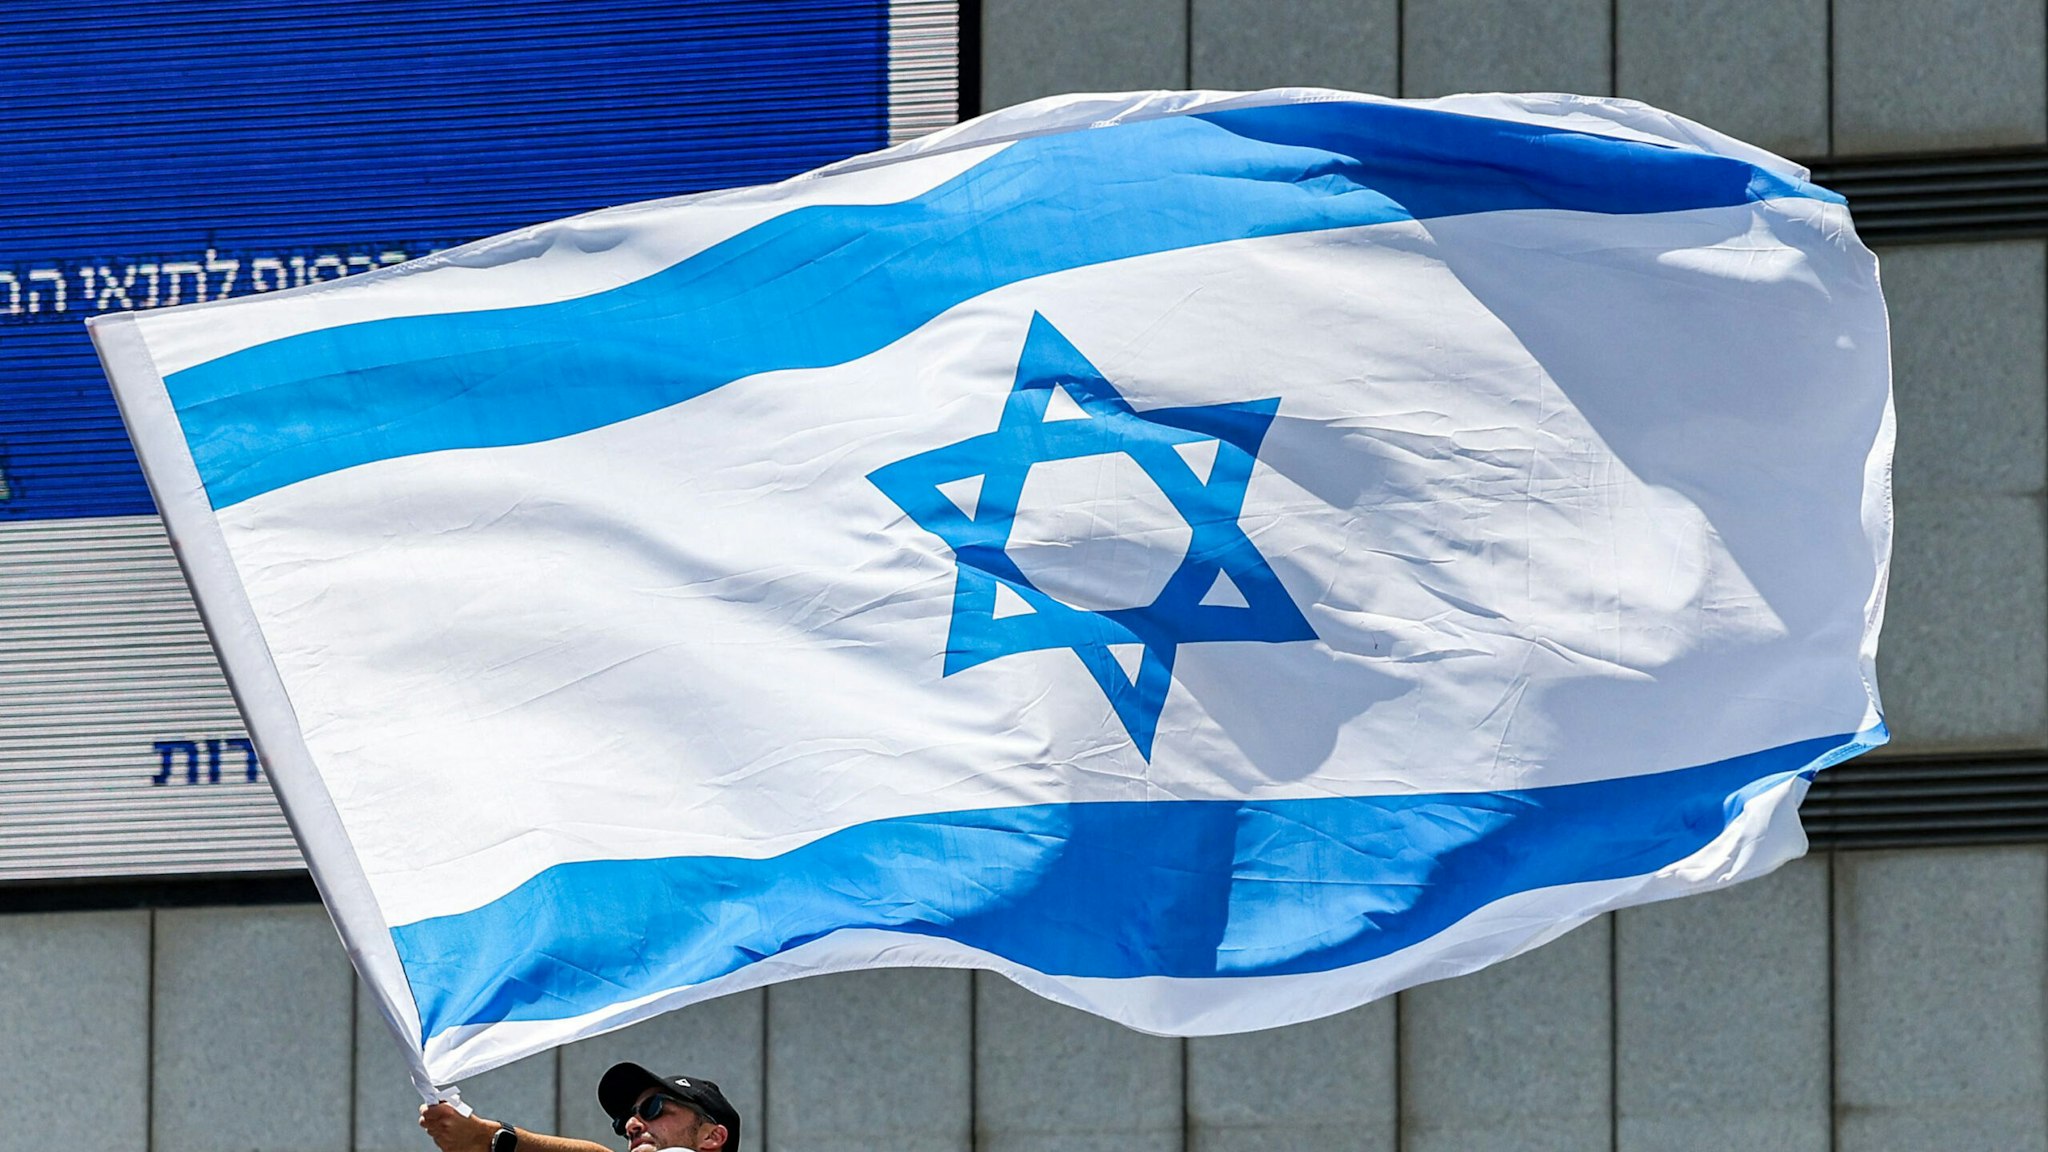 A man waves a large Israeli flag as anti-government demonstrators rally during a protest in Tel Aviv on July 11, 2023. Protesters blocked roads across Israel on July 11 hours after parliament adopted in a first reading a key clause of the government's judicial overhaul package which opponents say threatens democracy.